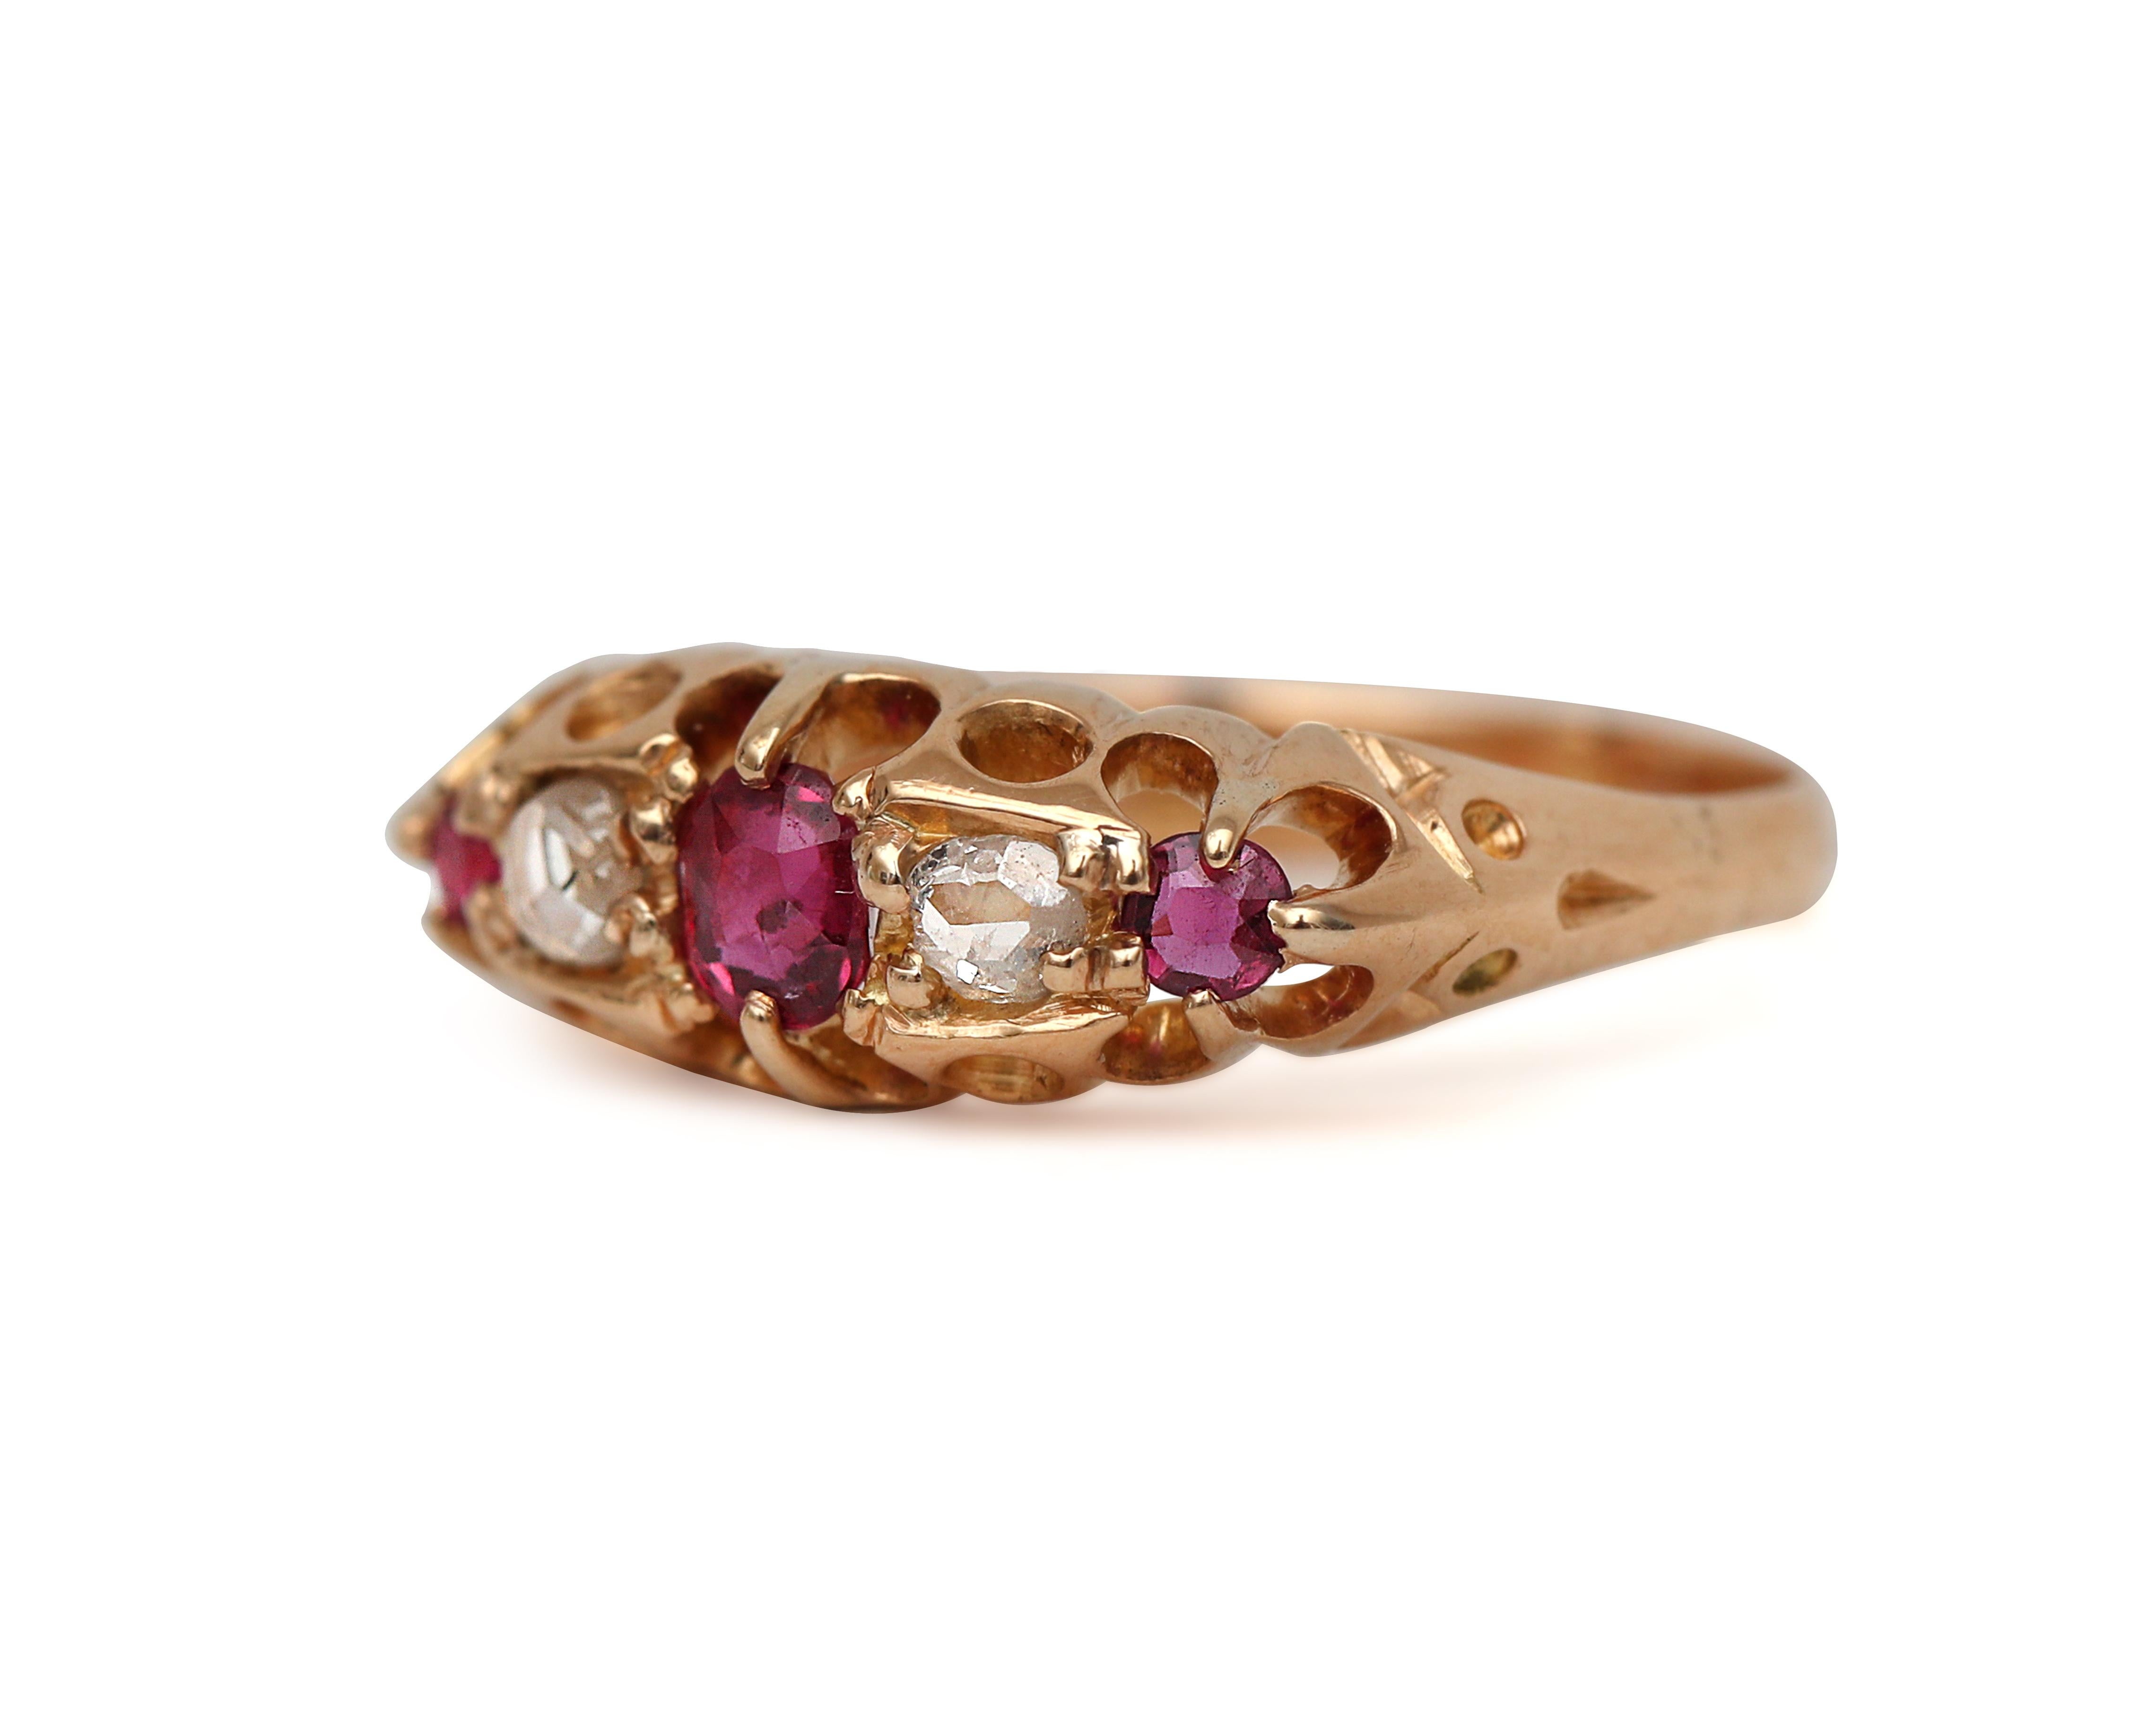 This is an exquisite example of a victorian color stone ring, featuring intense engraving details that lead to a center natural ruby surrounded by period correct old cut diamonds. The Chester British proof marks show this beauty was created in 1905!